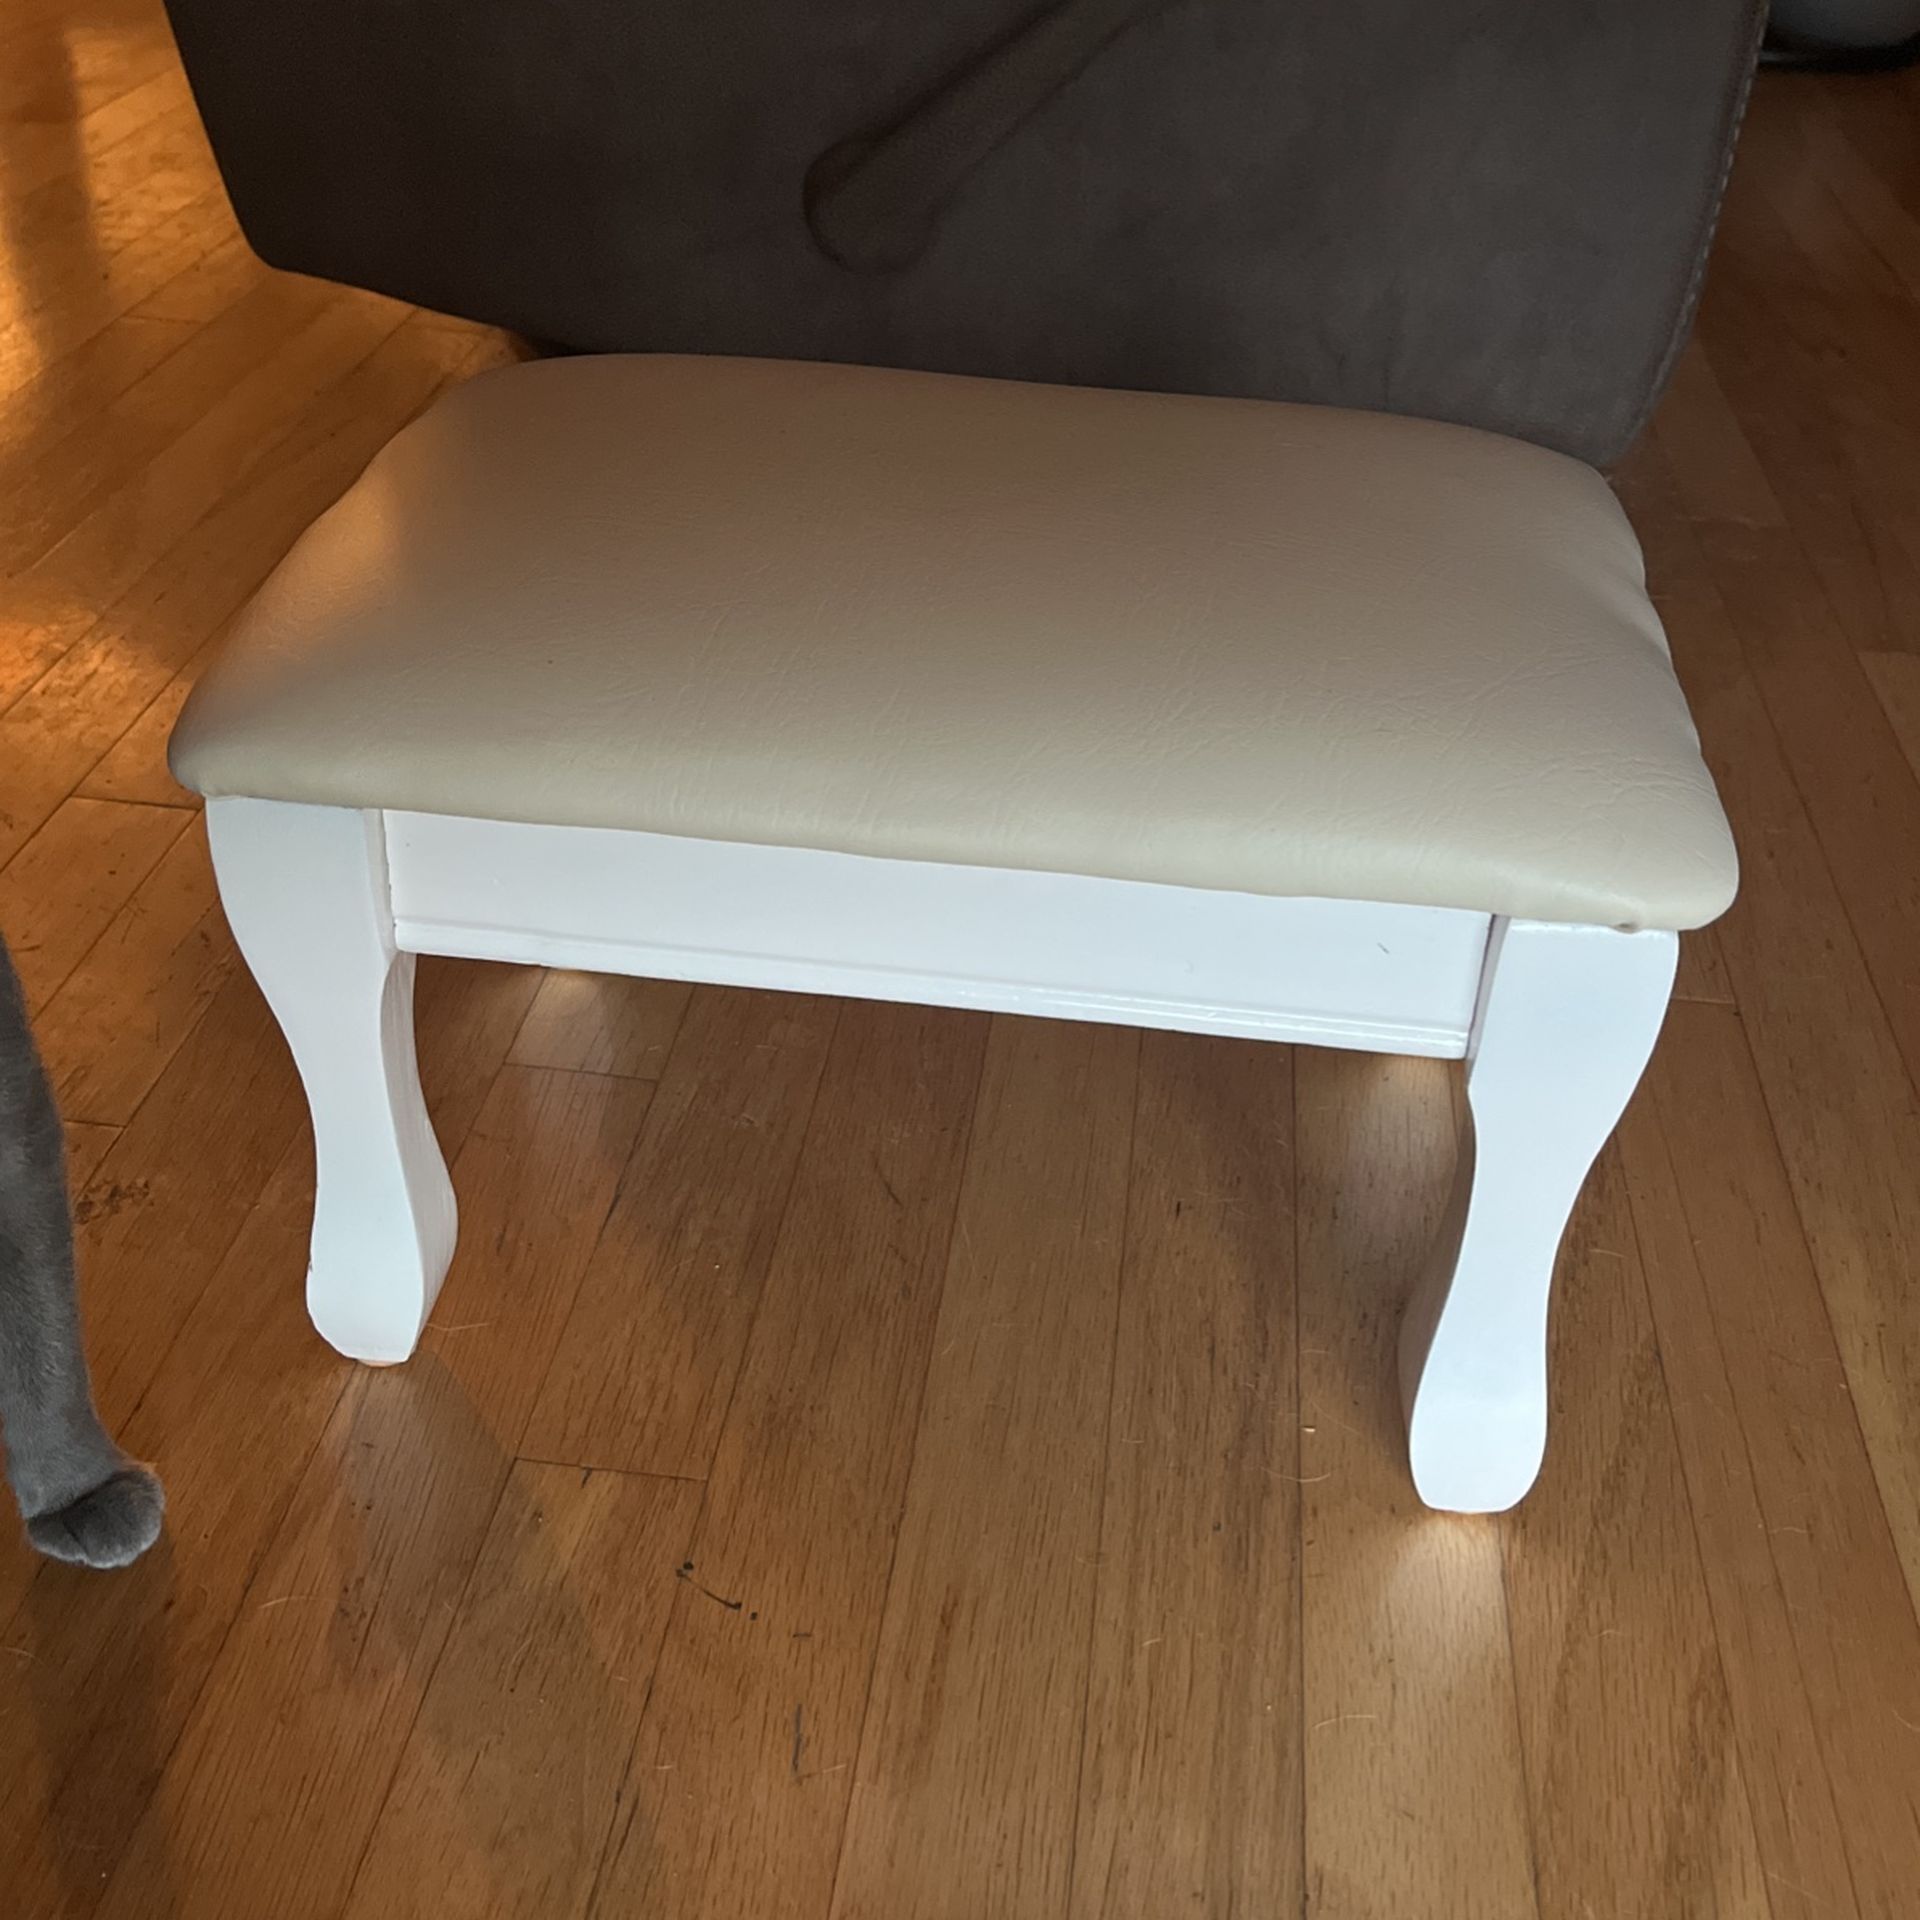 New Foot Stool/ Manicurist Chair/chair